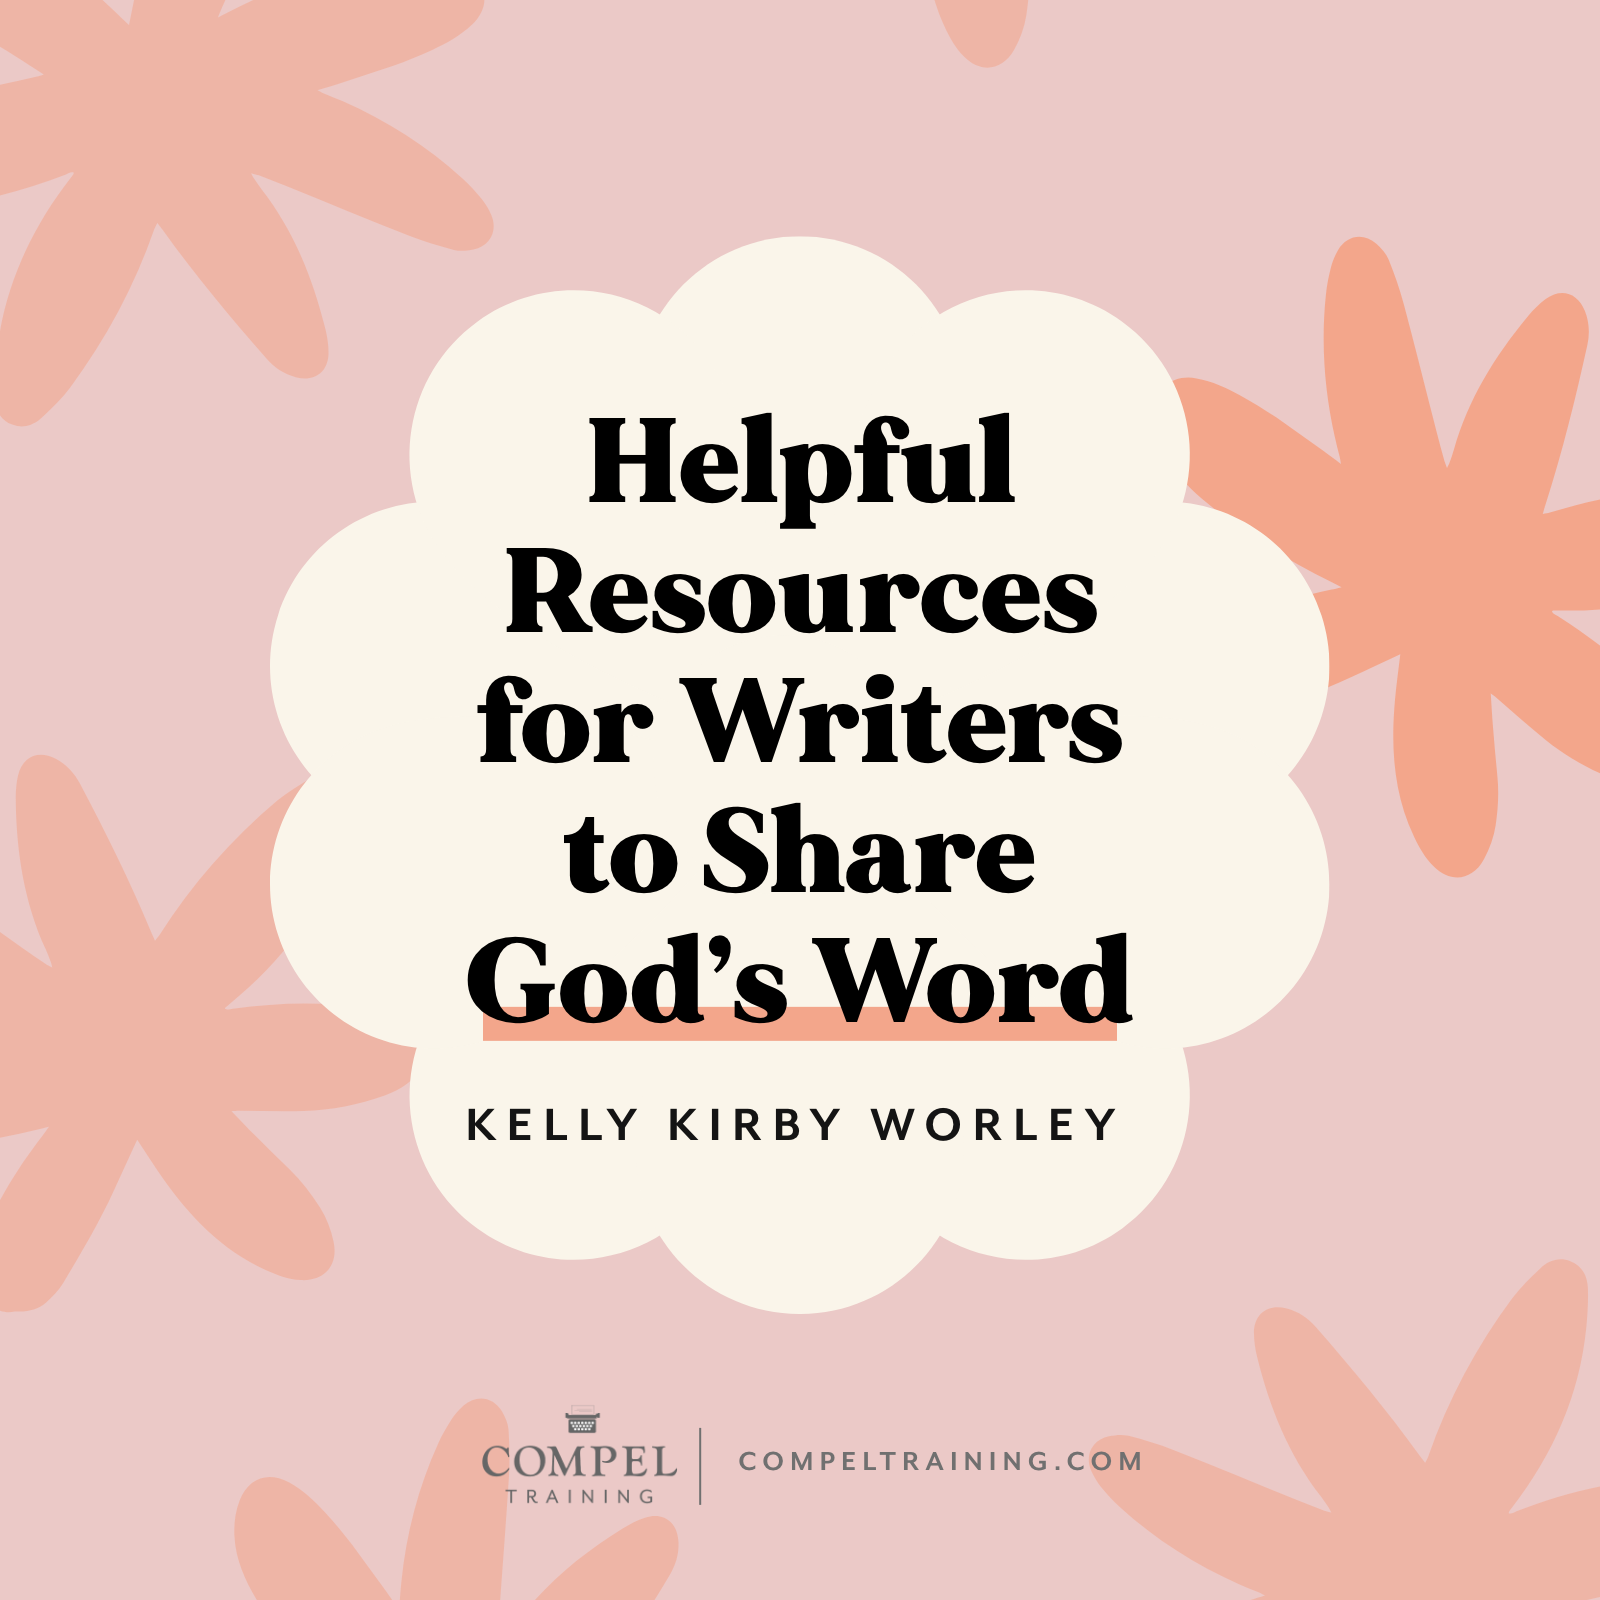 Helpful Resources for Writers to Share God’s Word